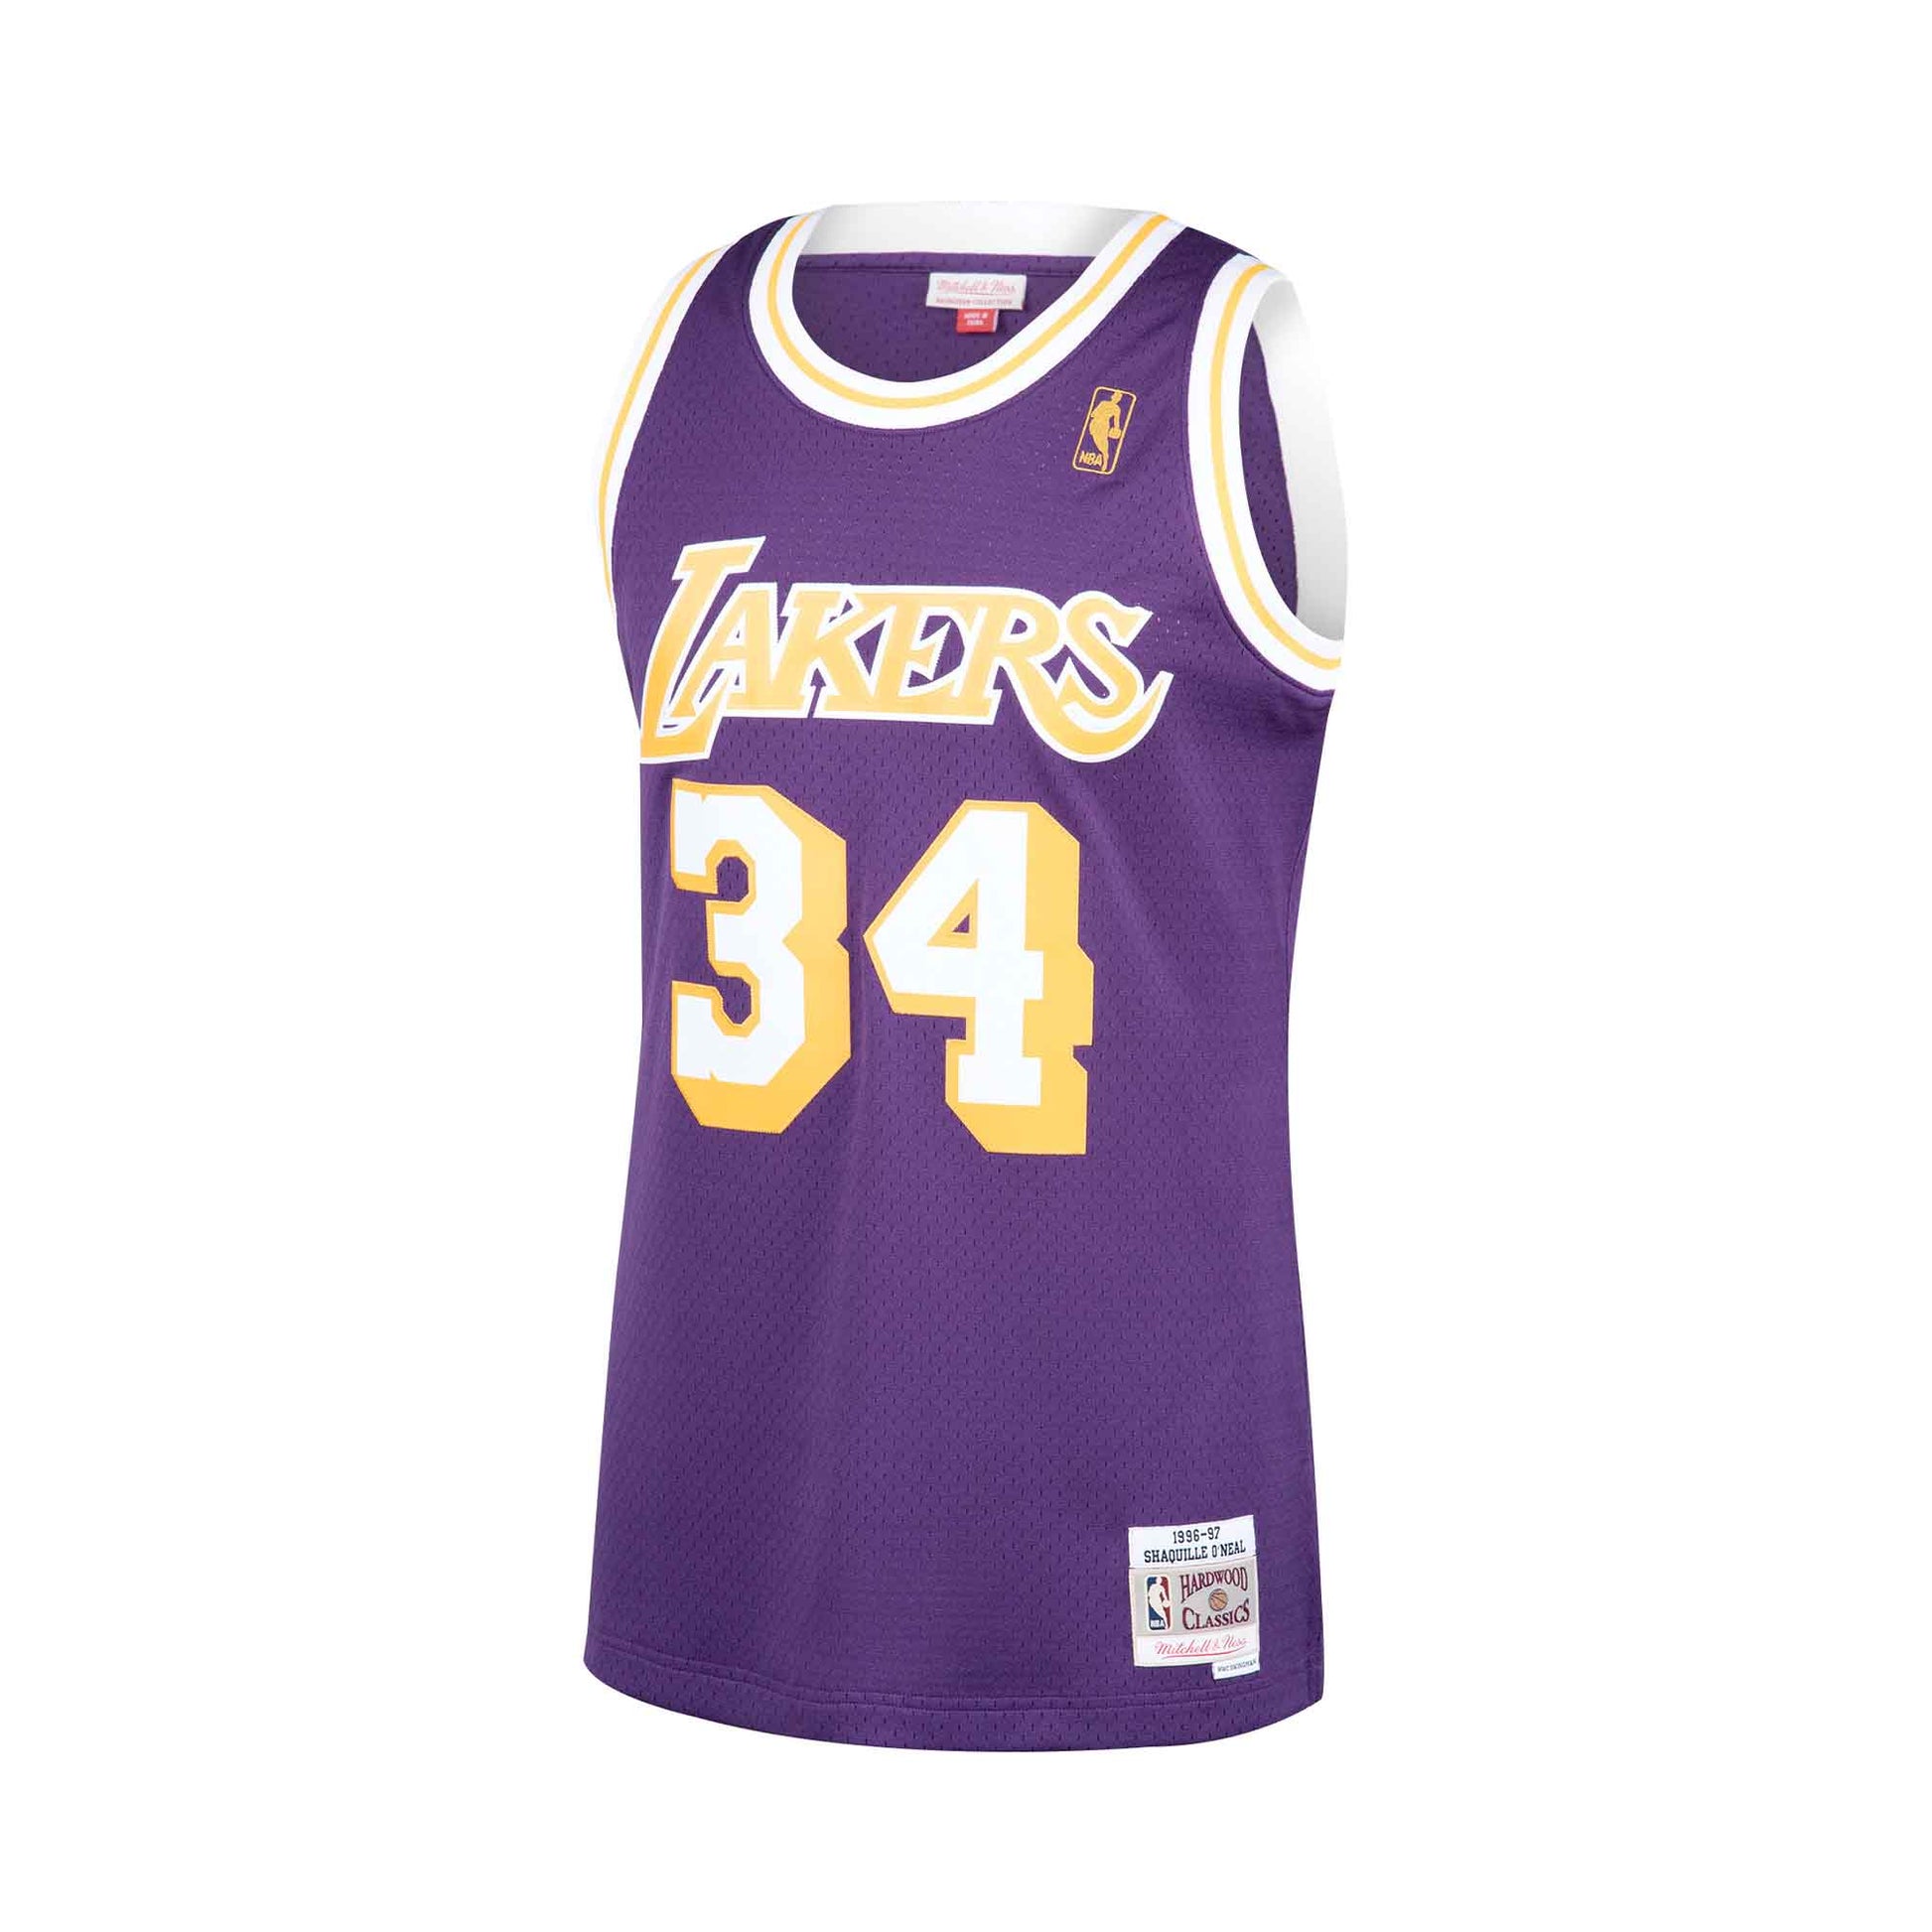 Mens Clothing - Mitchell & Ness NBA Shaquille Oneal Los Angeles Lakers  Swingman Jersey - Purple - Jerseys